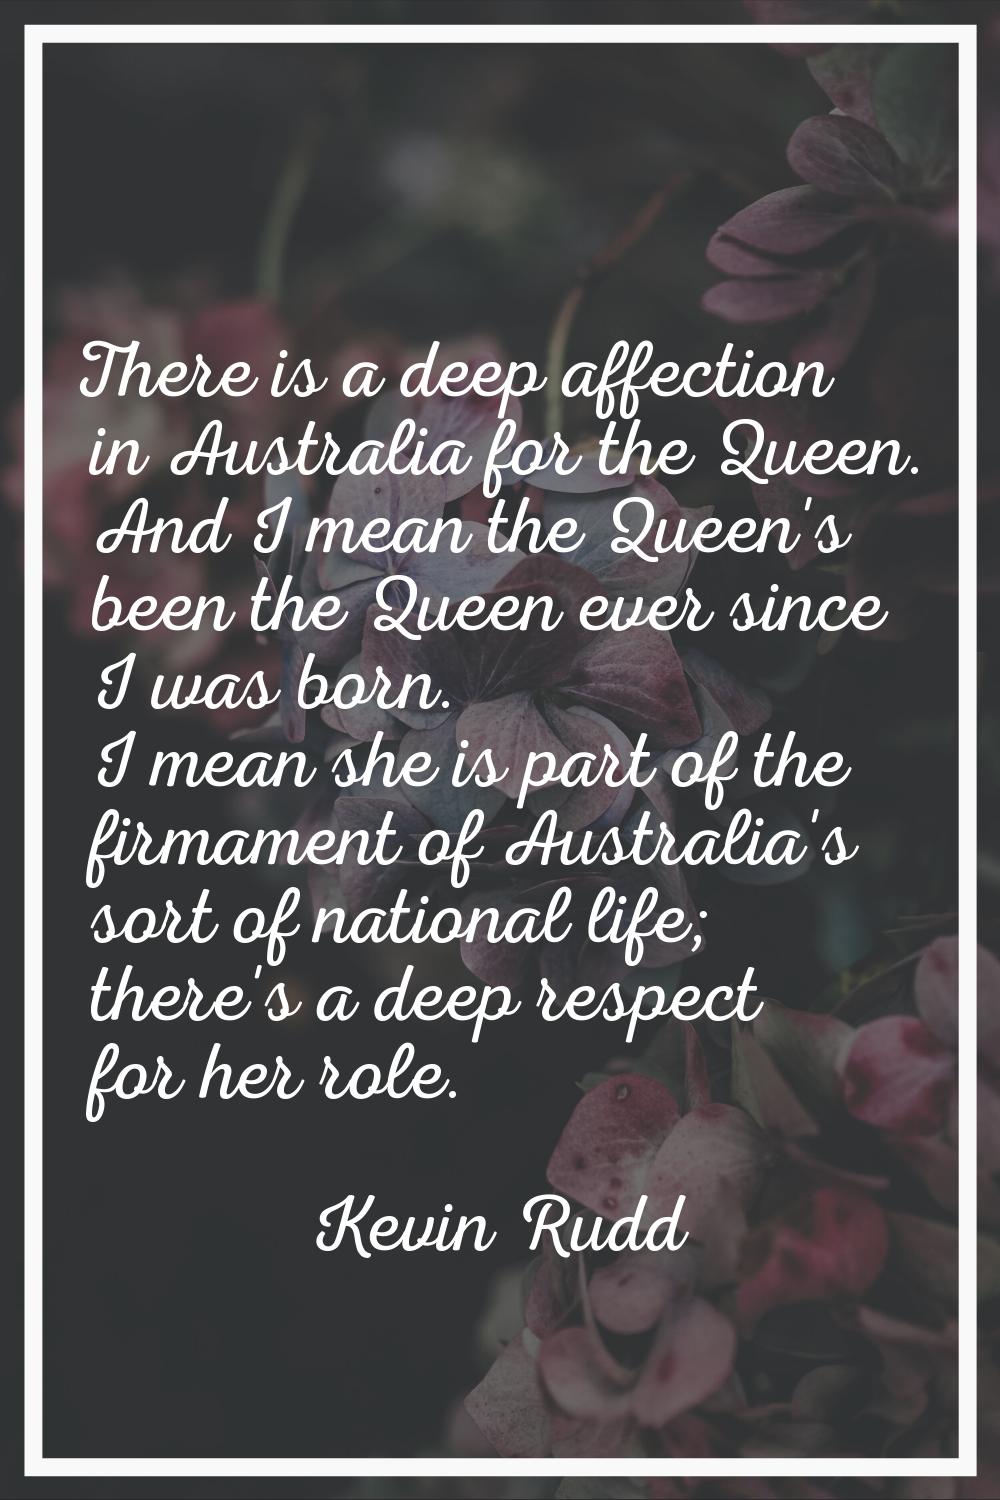 There is a deep affection in Australia for the Queen. And I mean the Queen's been the Queen ever si